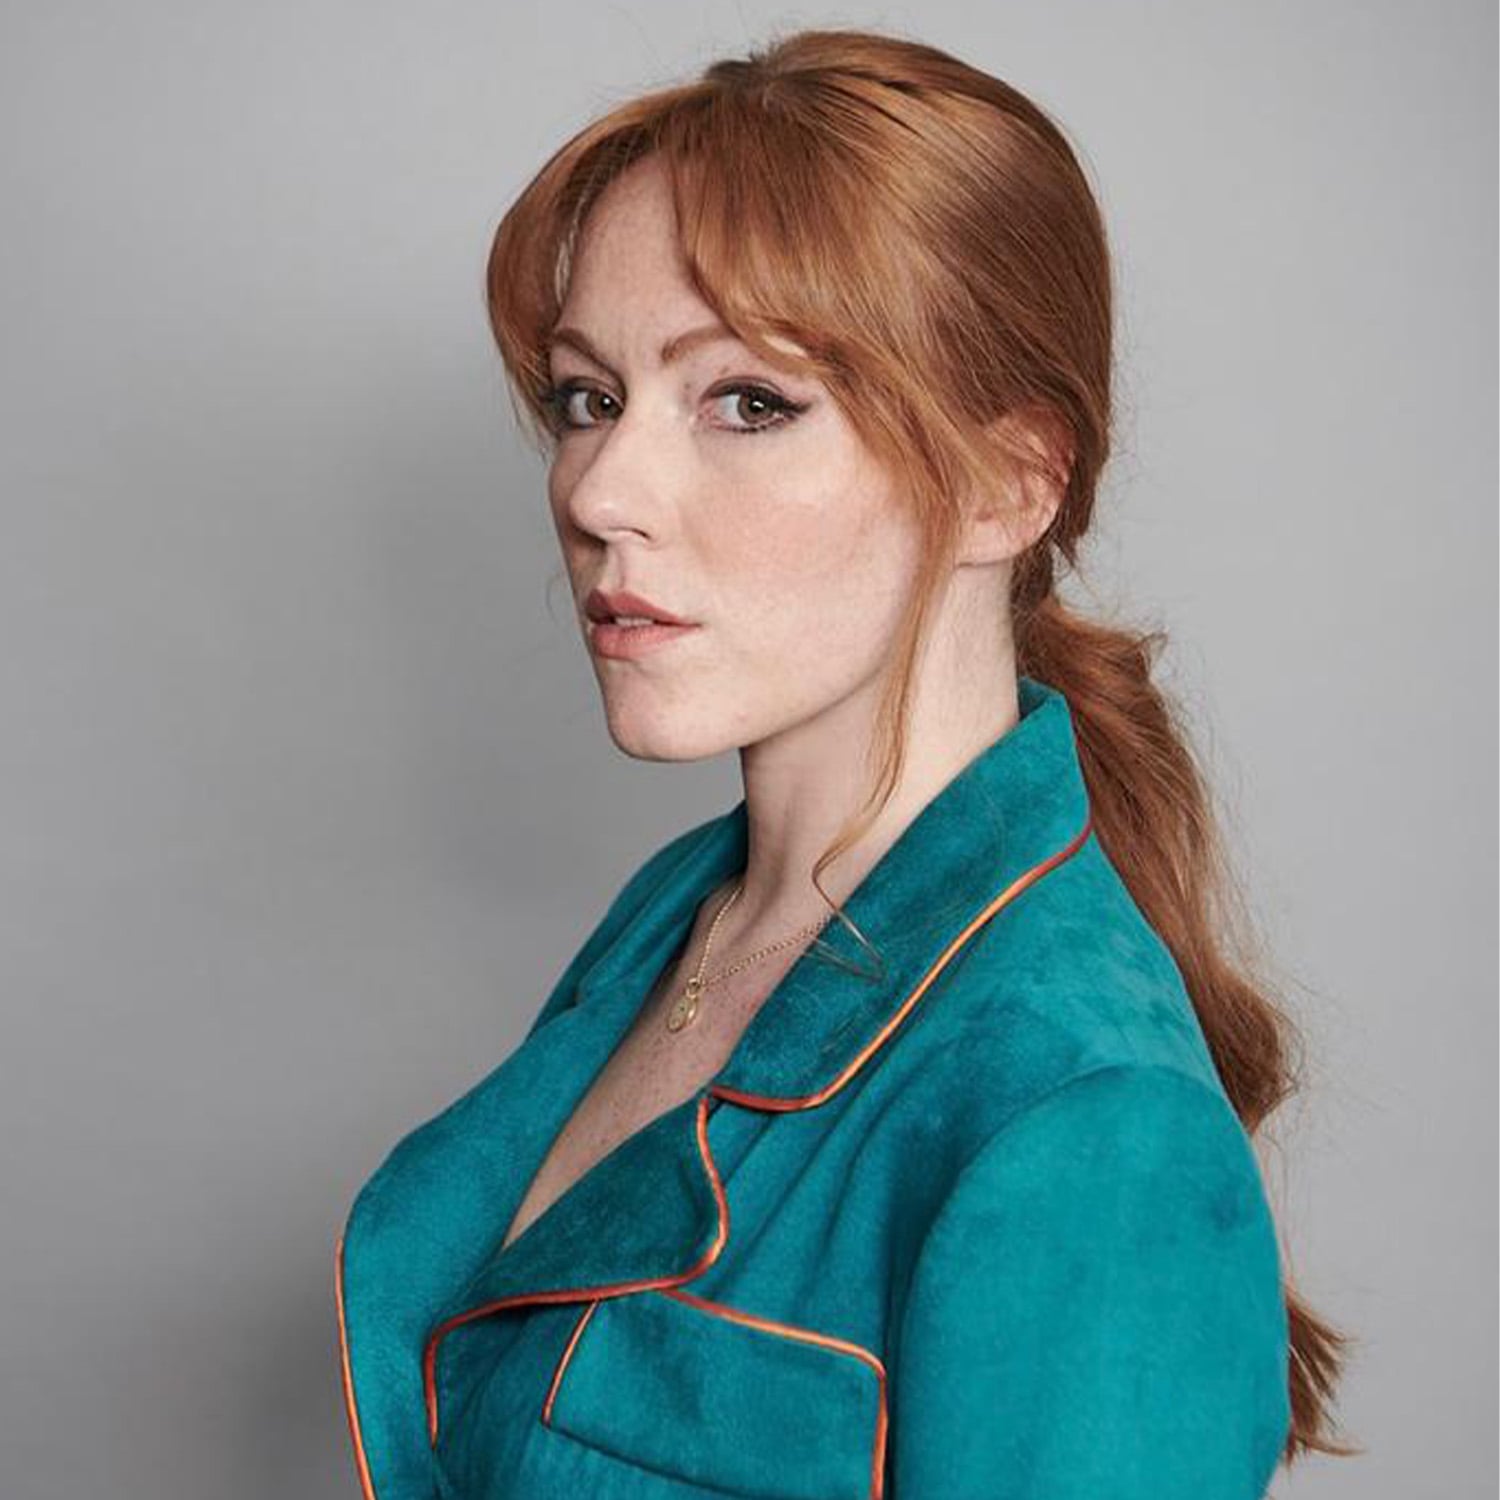 Profile photo of Charlotte Spencer wearing a blue jacket for Alex Monroe's Podcast